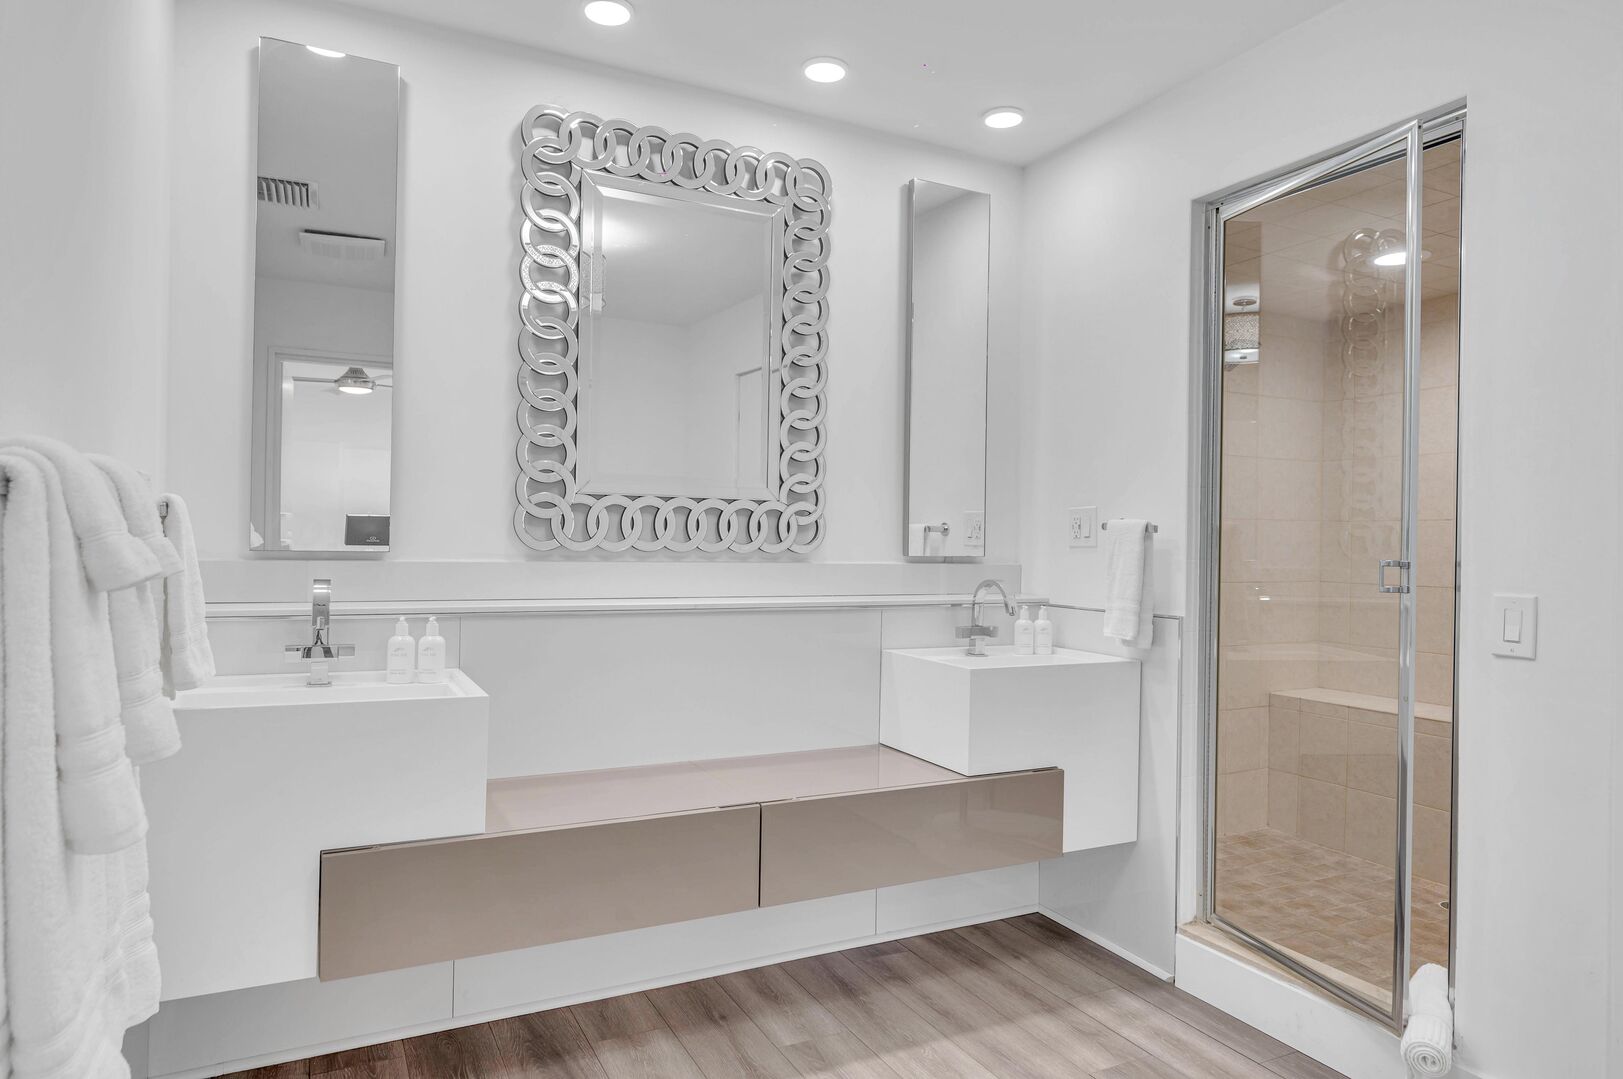 The luxurious primary bathroom features a double vanity and shower.